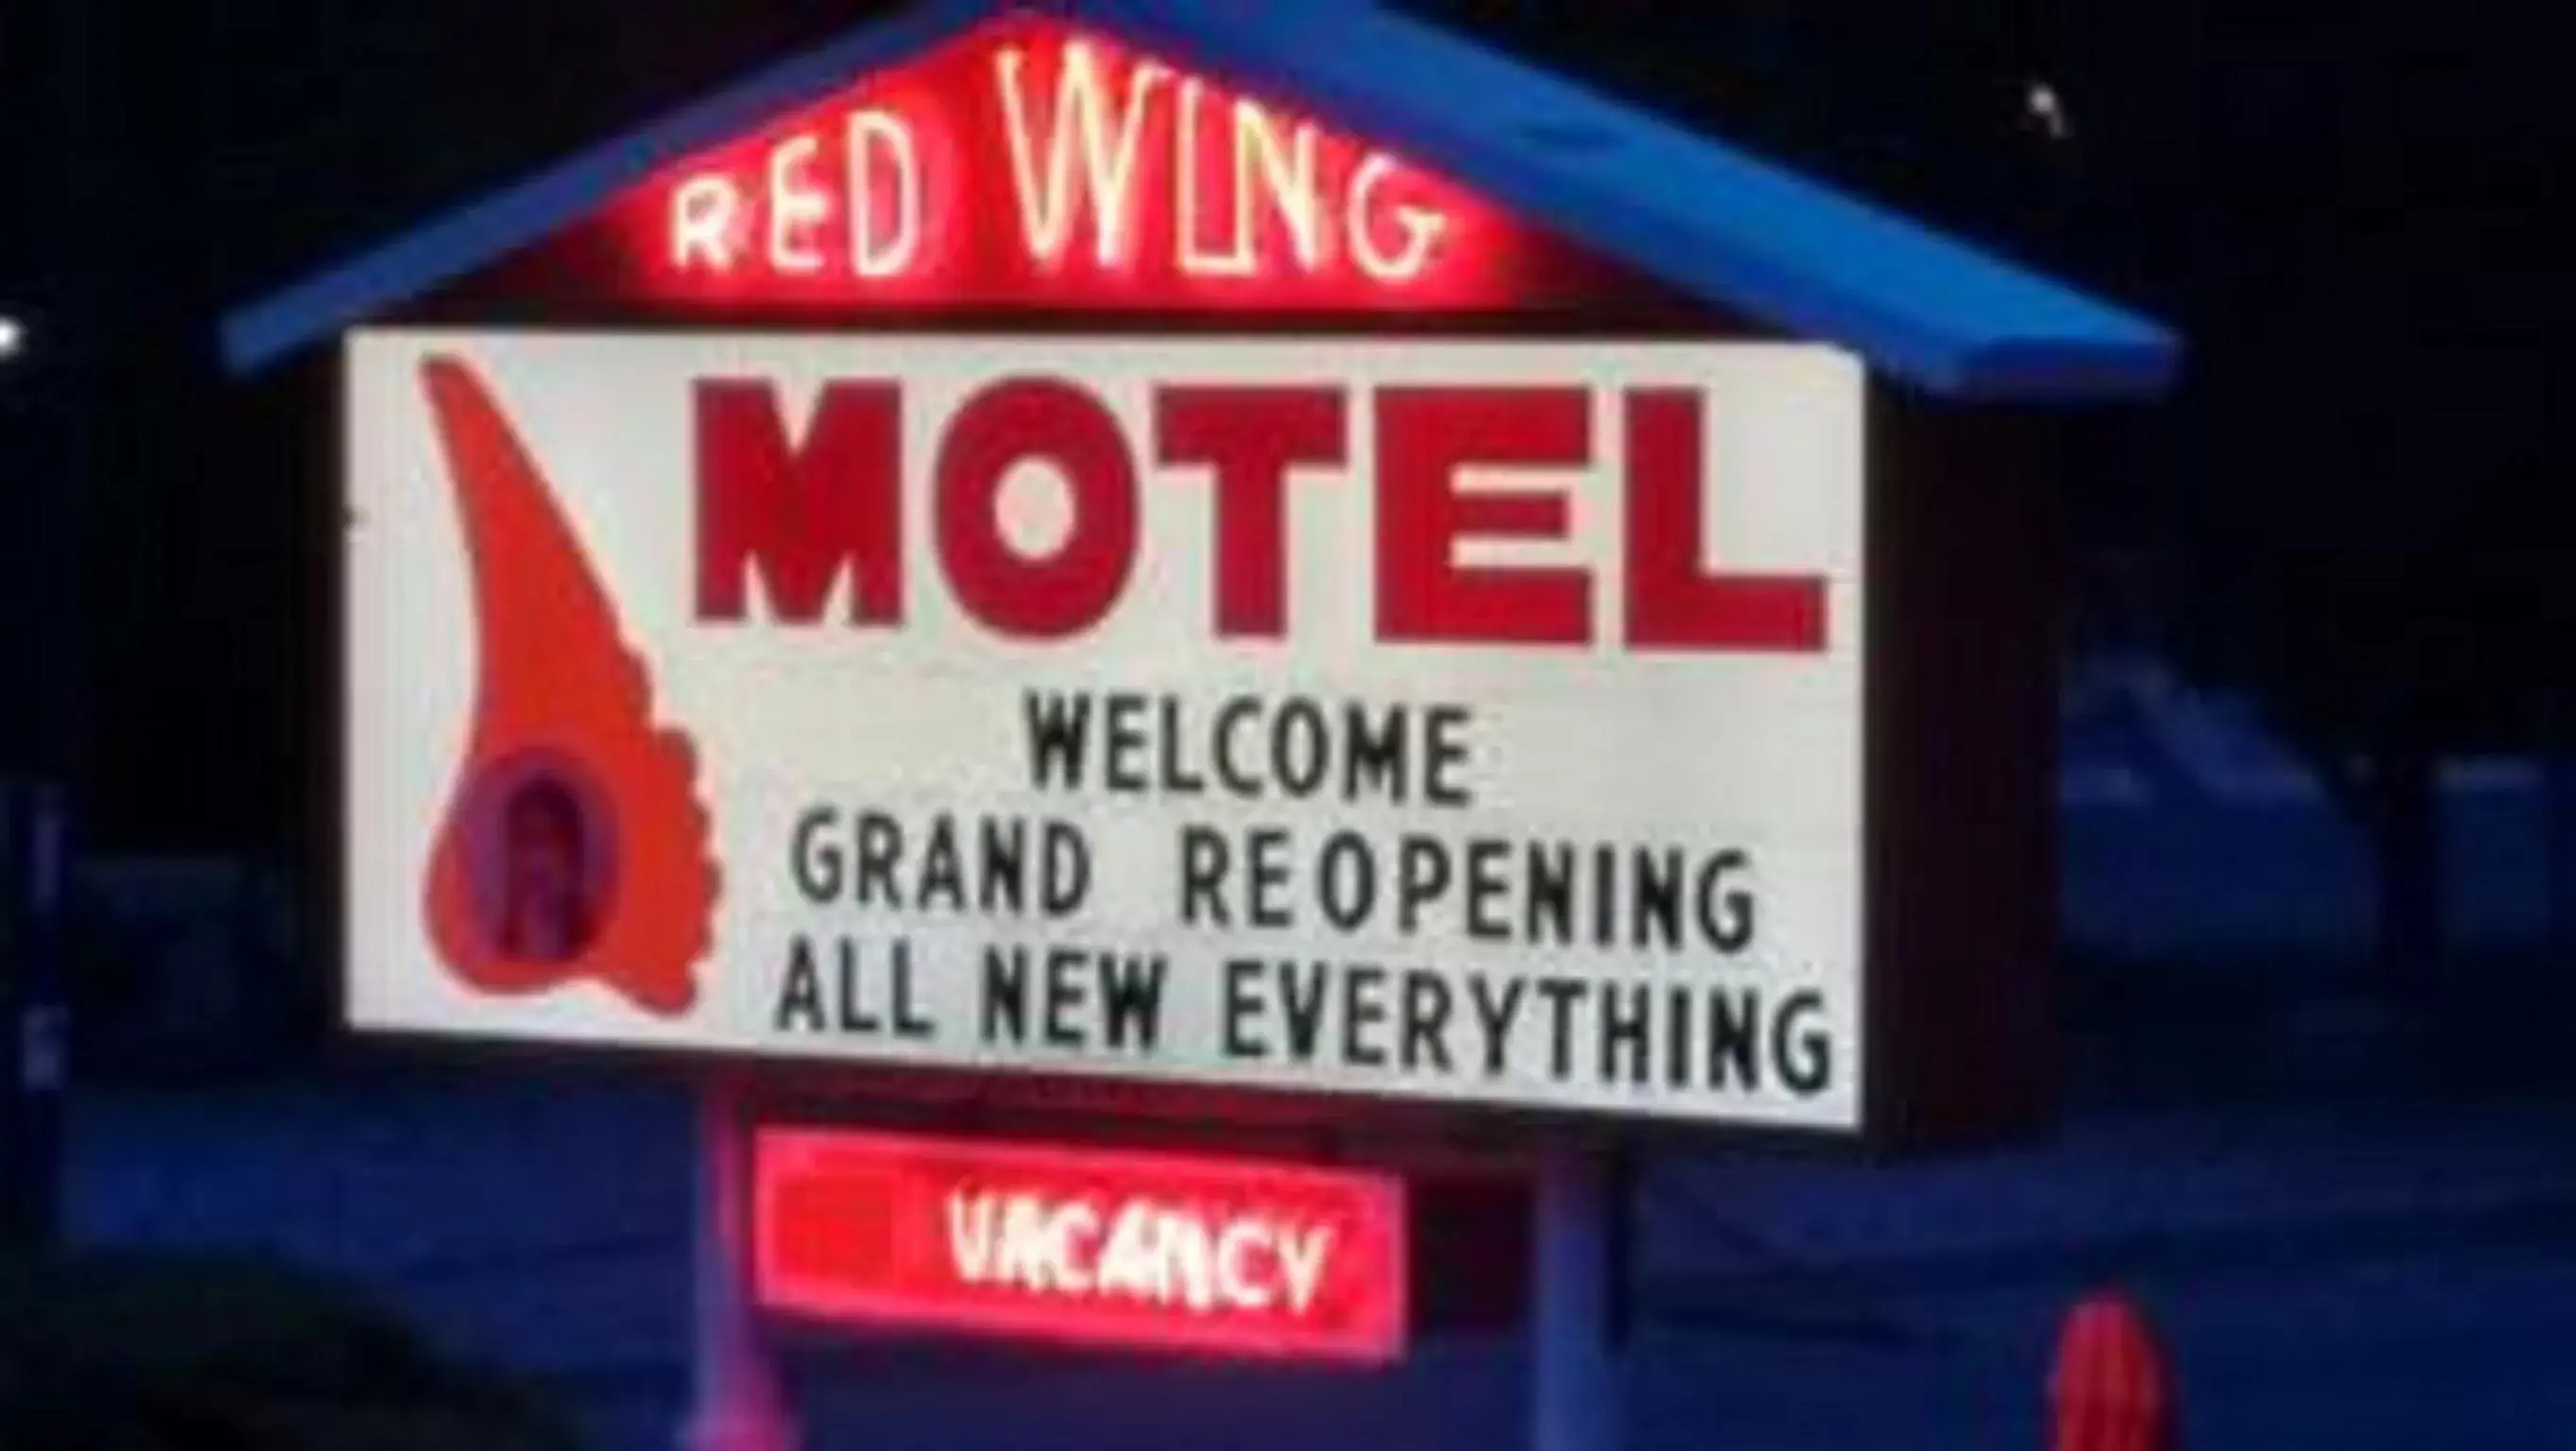 Property logo or sign, Logo/Certificate/Sign/Award in Red Wing Motel